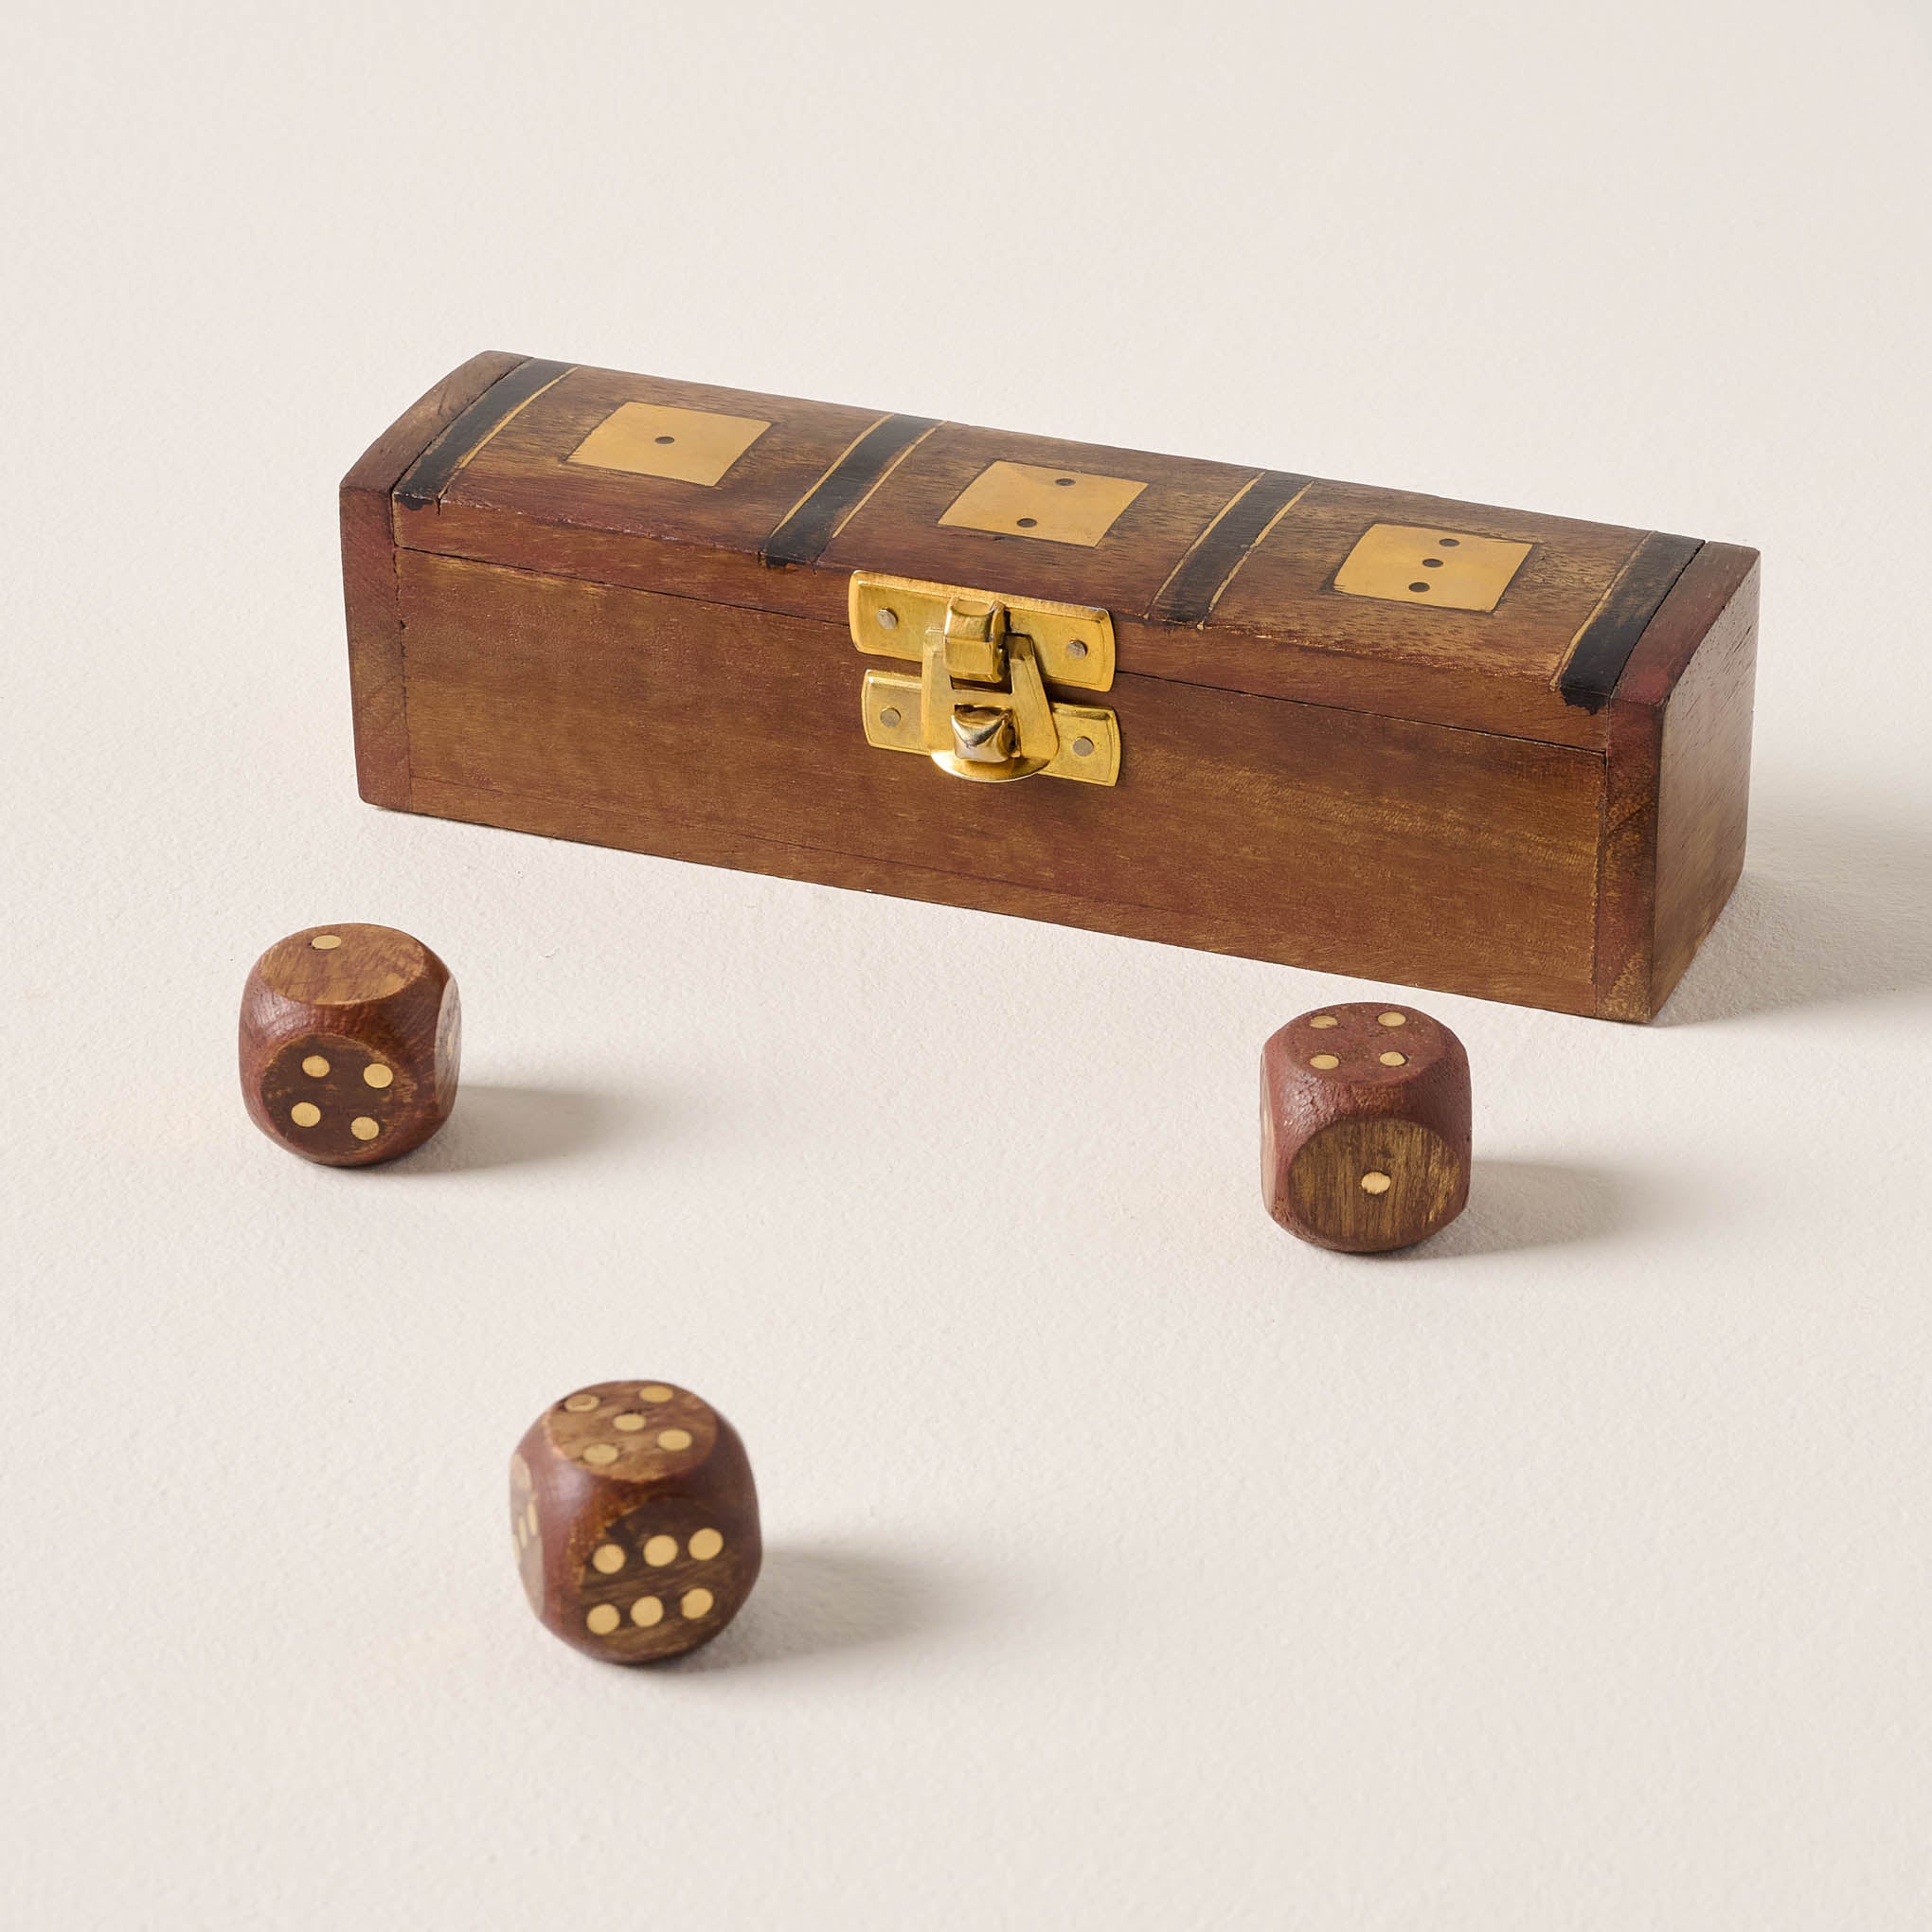 Gold Inlay Dice Case with dice out of the box $22.00